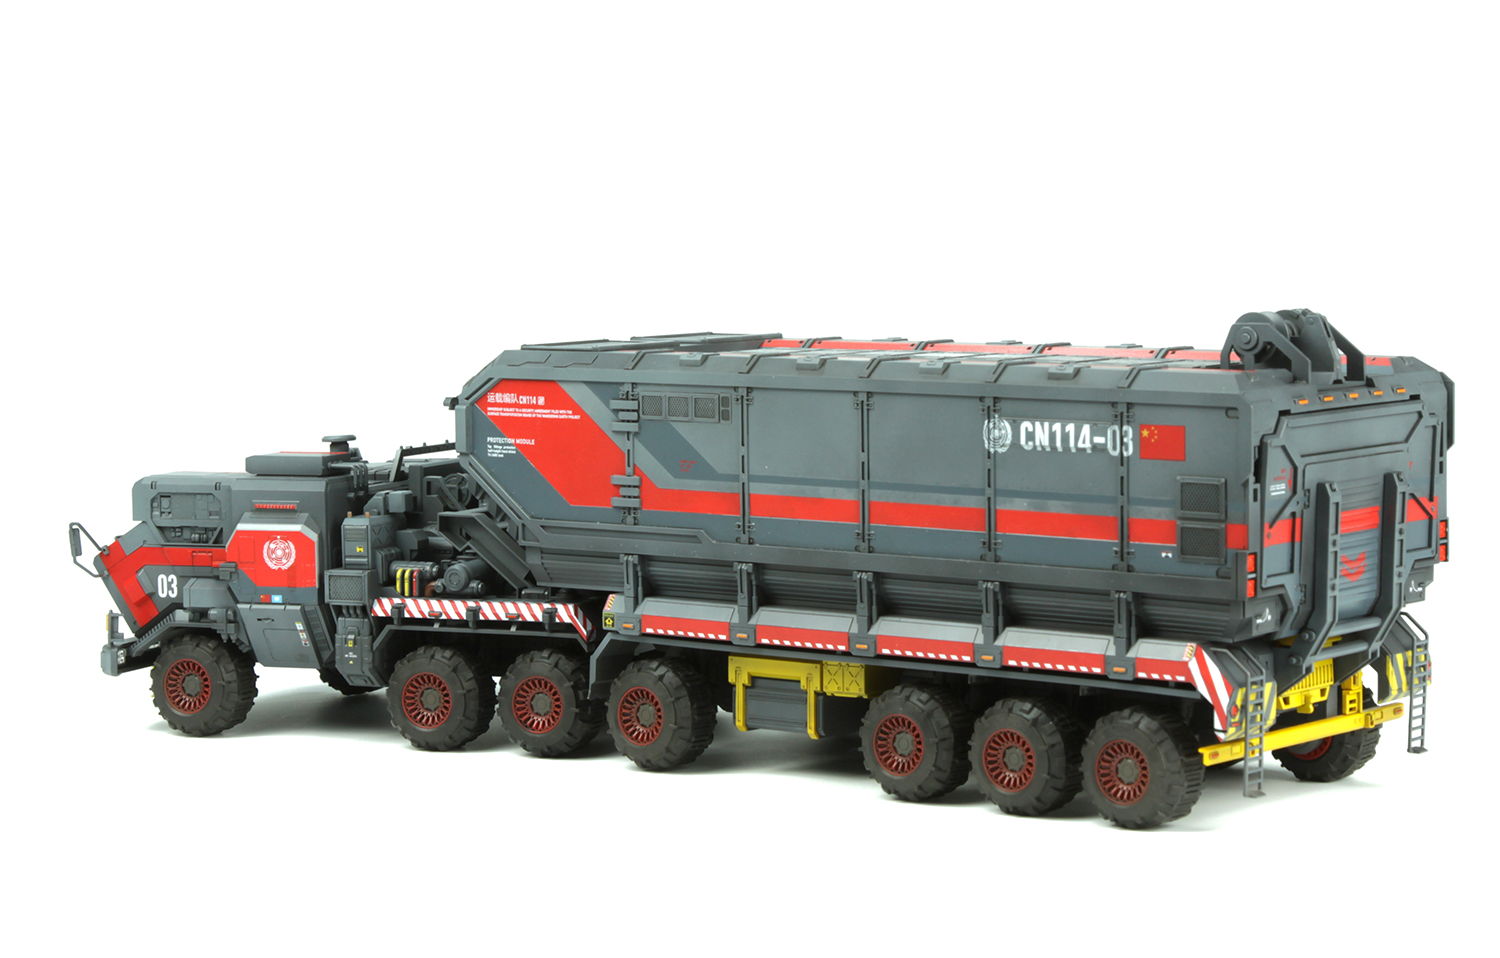 Meng Models MS001 1:100 The Wandering Earth Cargo Transport Truck 